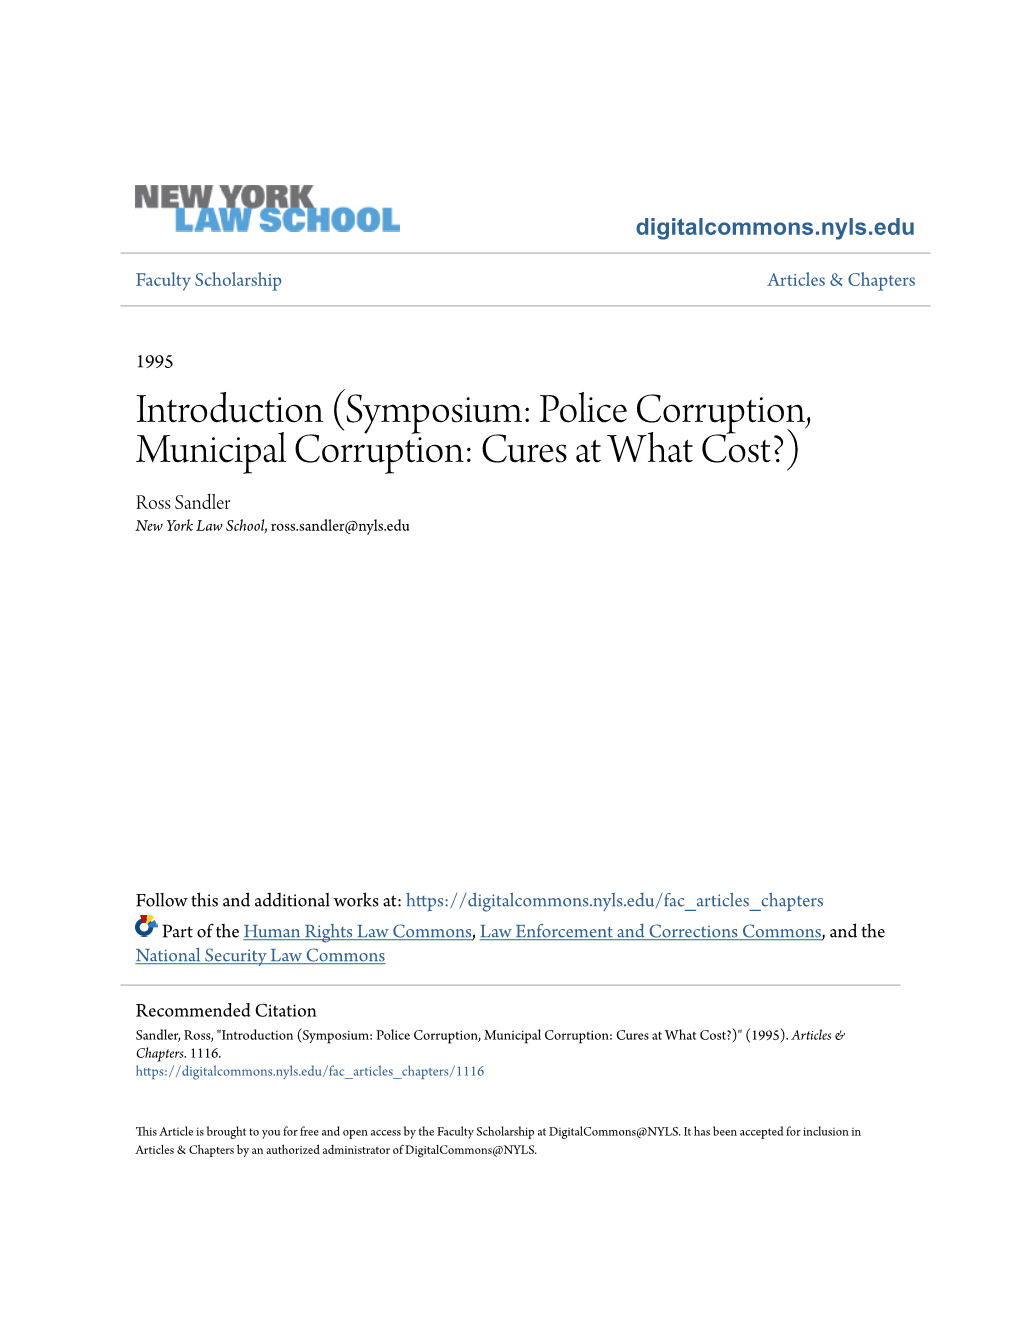 Symposium: Police Corruption, Municipal Corruption: Cures at What Cost?) Ross Sandler New York Law School, Ross.Sandler@Nyls.Edu